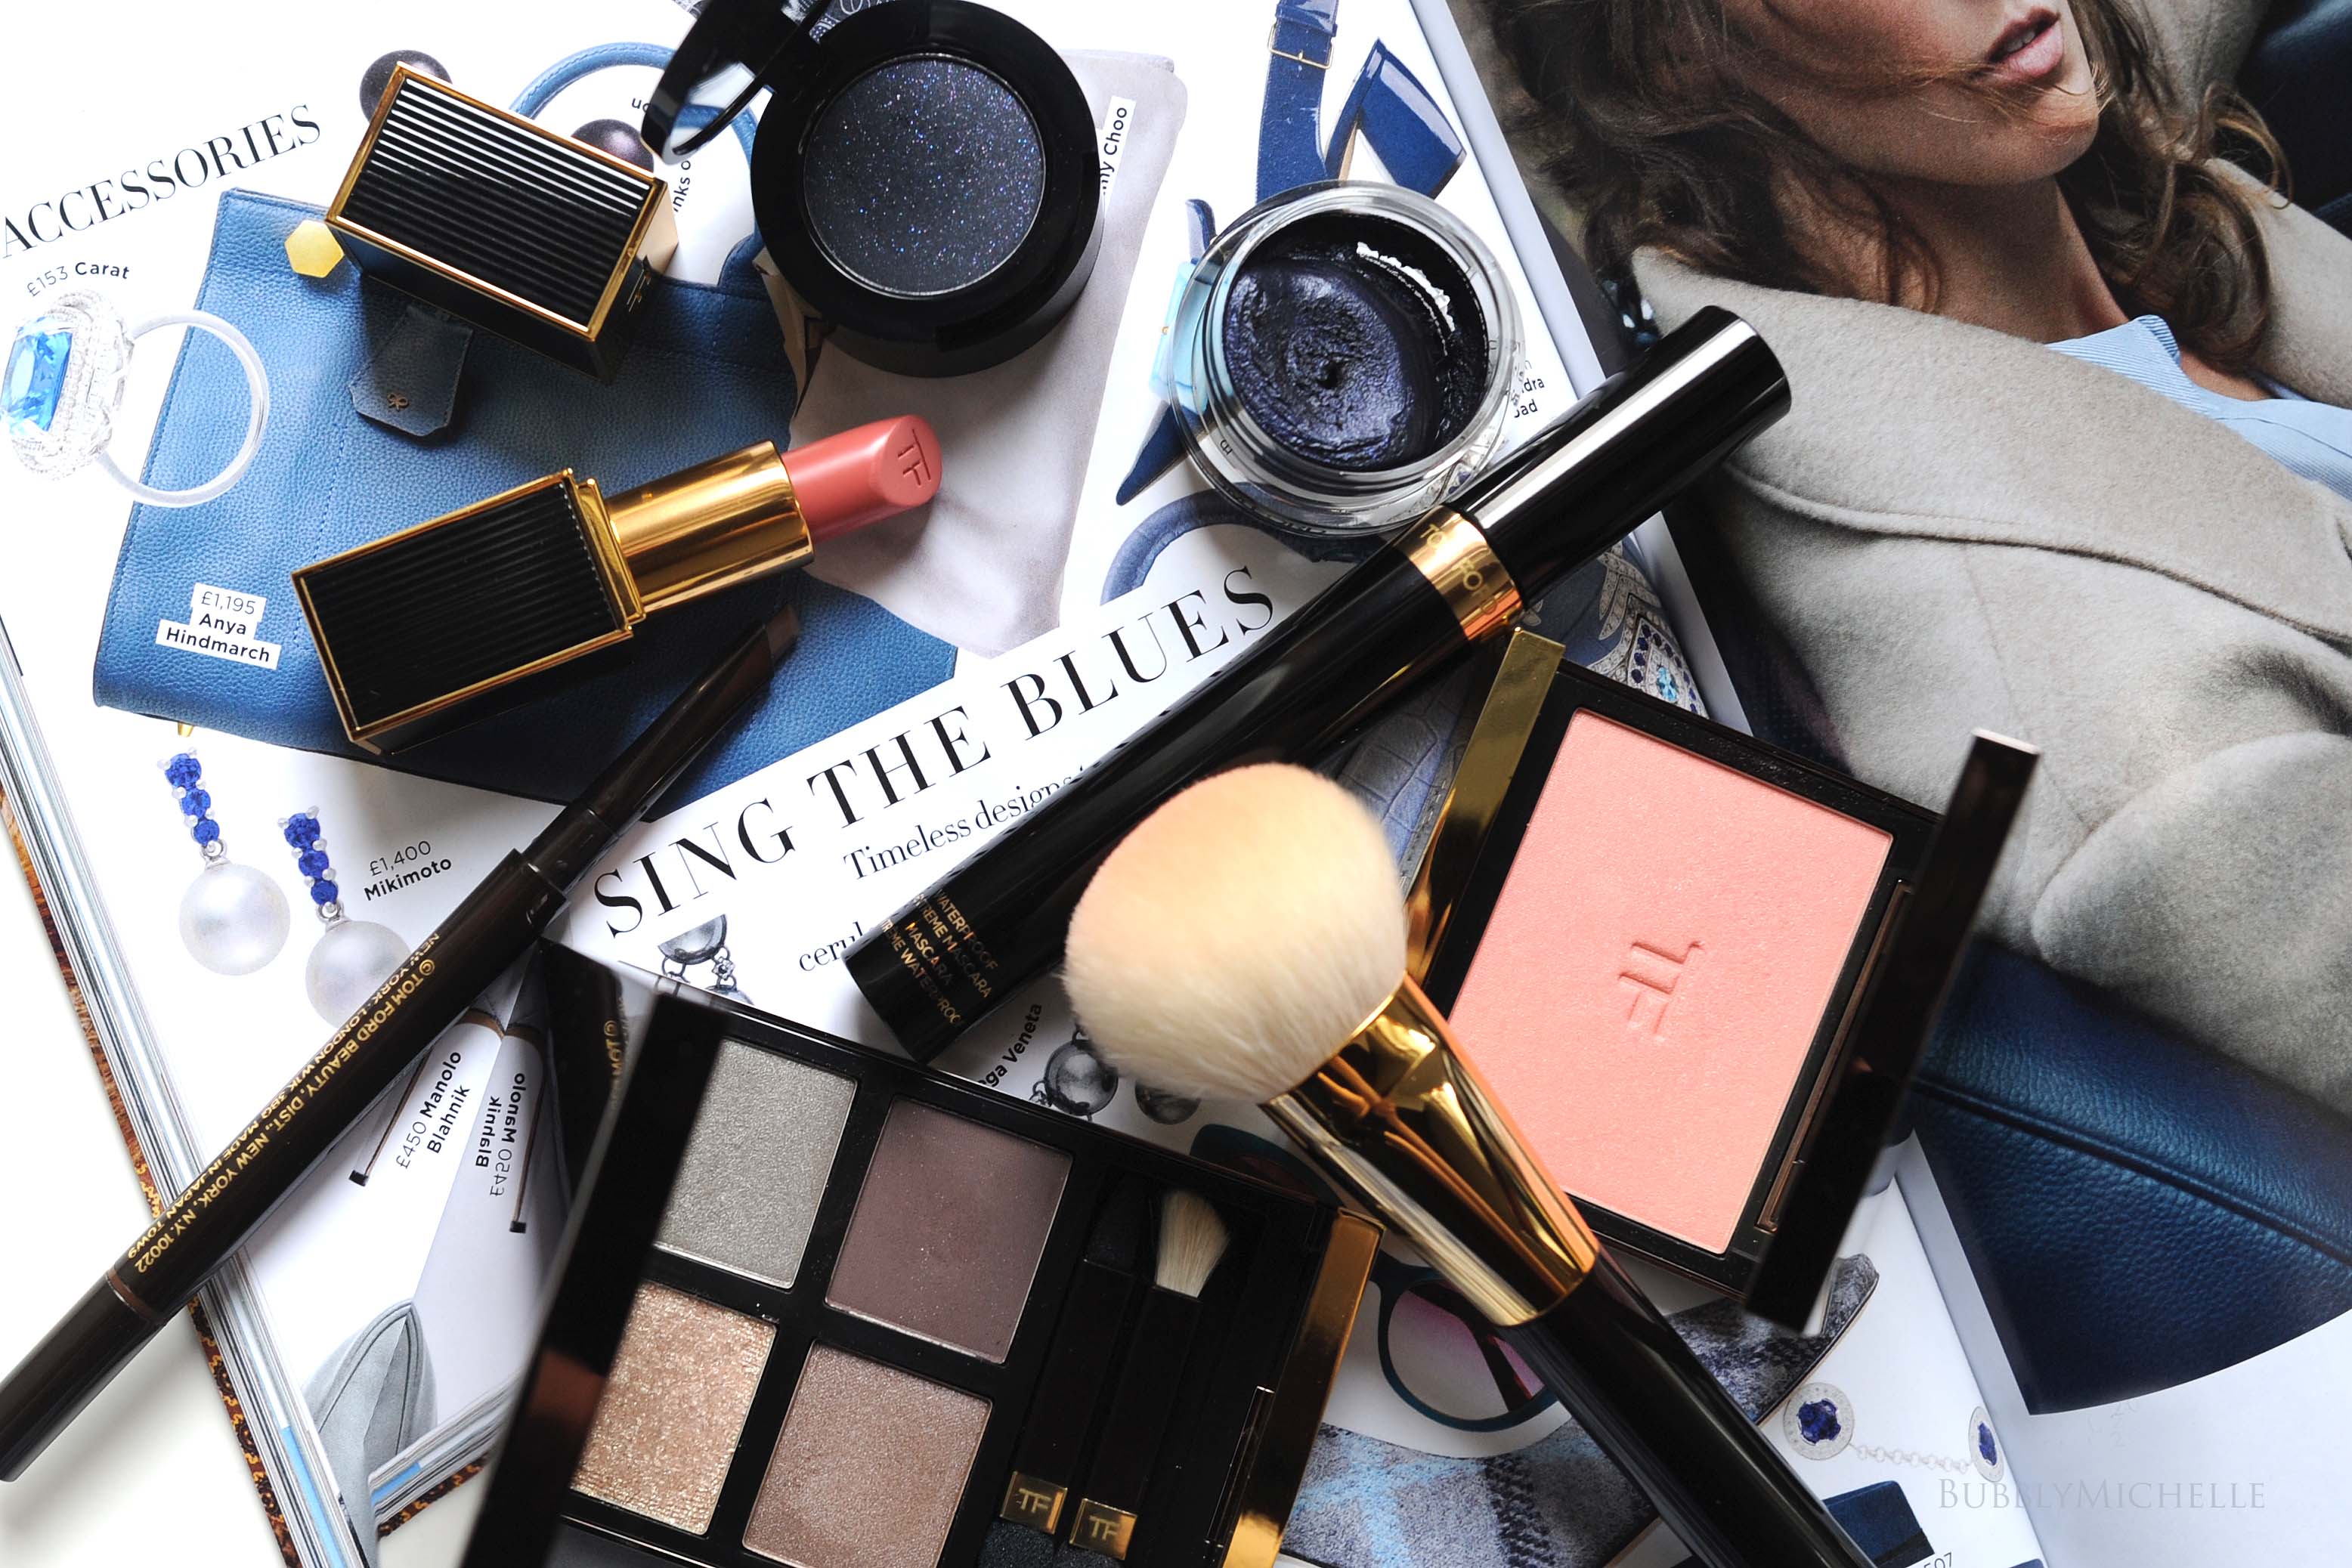 Chanel makeup, Chanel Skincare, skincare aesthetic, @thebeautybloss